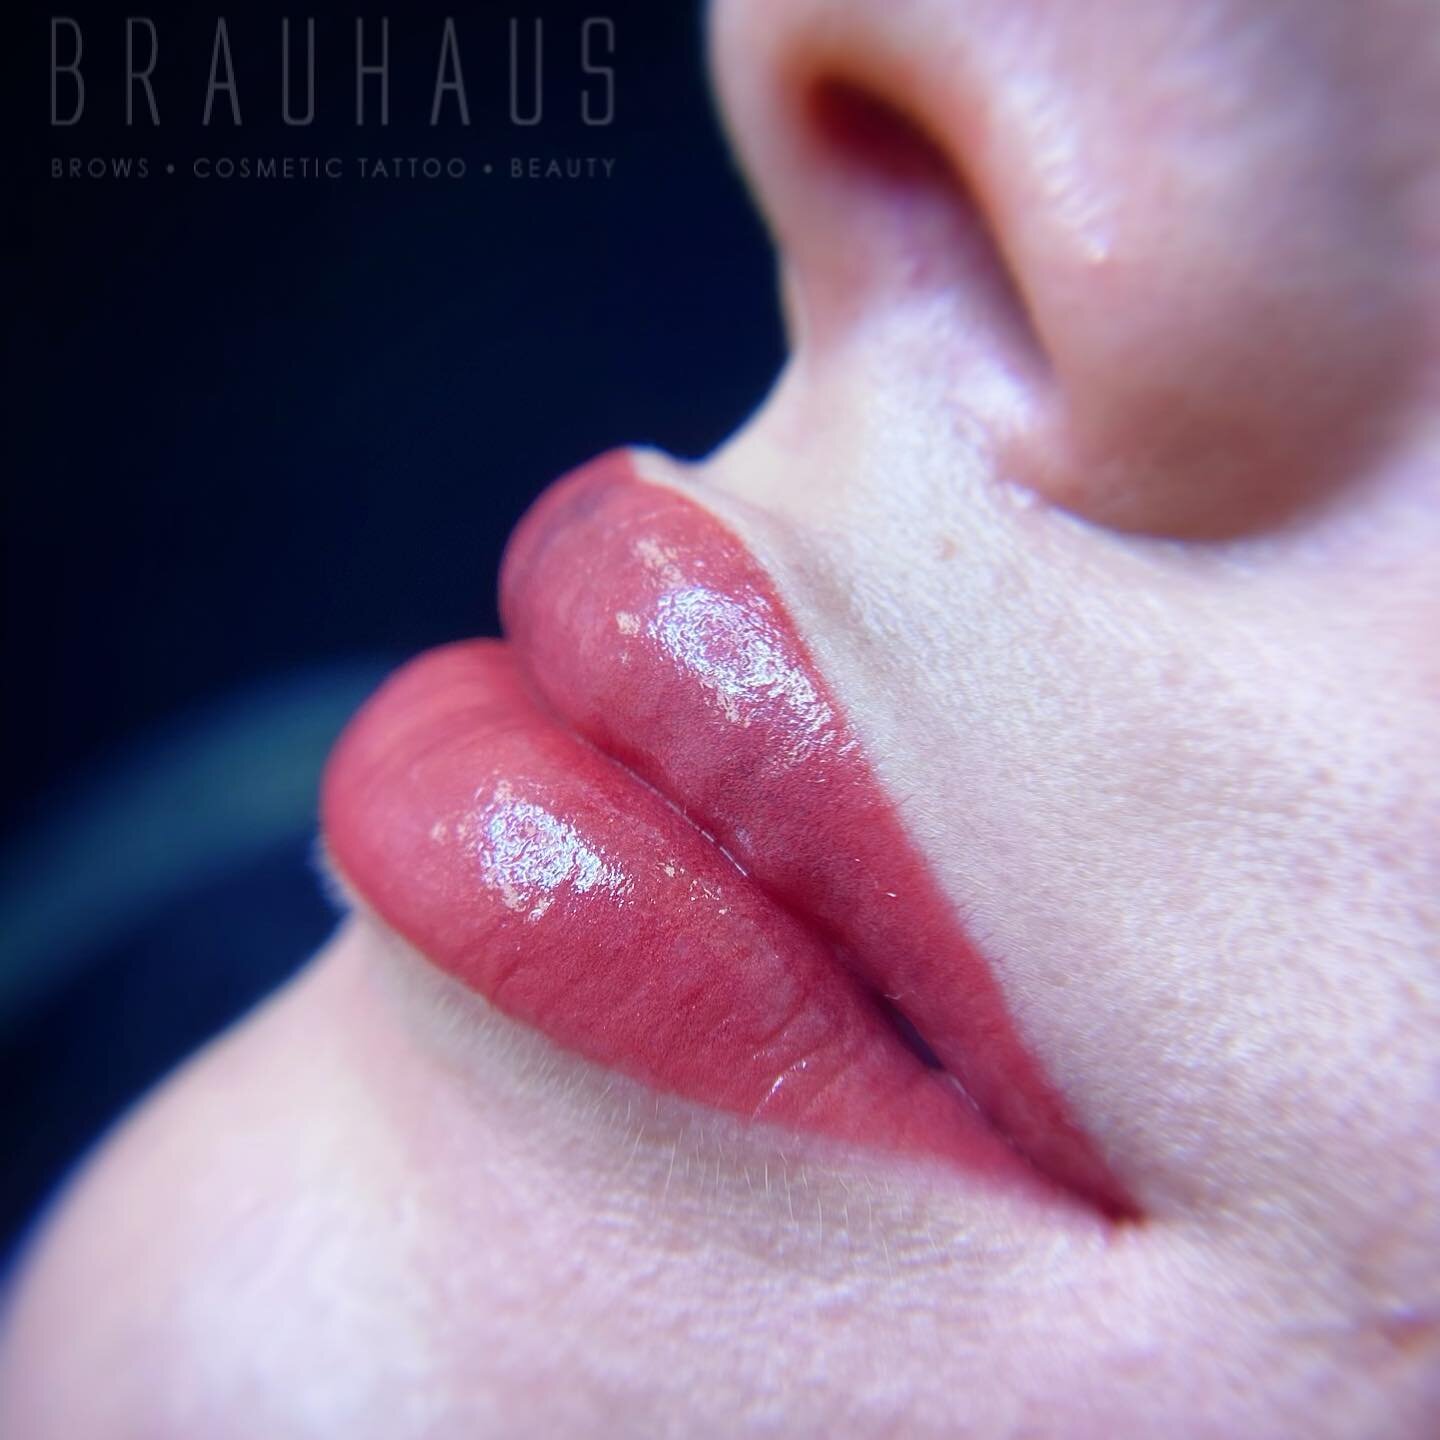 Spent two days learning &lsquo;Brilliant Lips&rsquo; with @beautydreamsla 
Thank you Natasha and Dina for such an amazing experience. I learned so very much and it was the push I needed to become a better artist. I will be forever grateful 🙏

Thank 